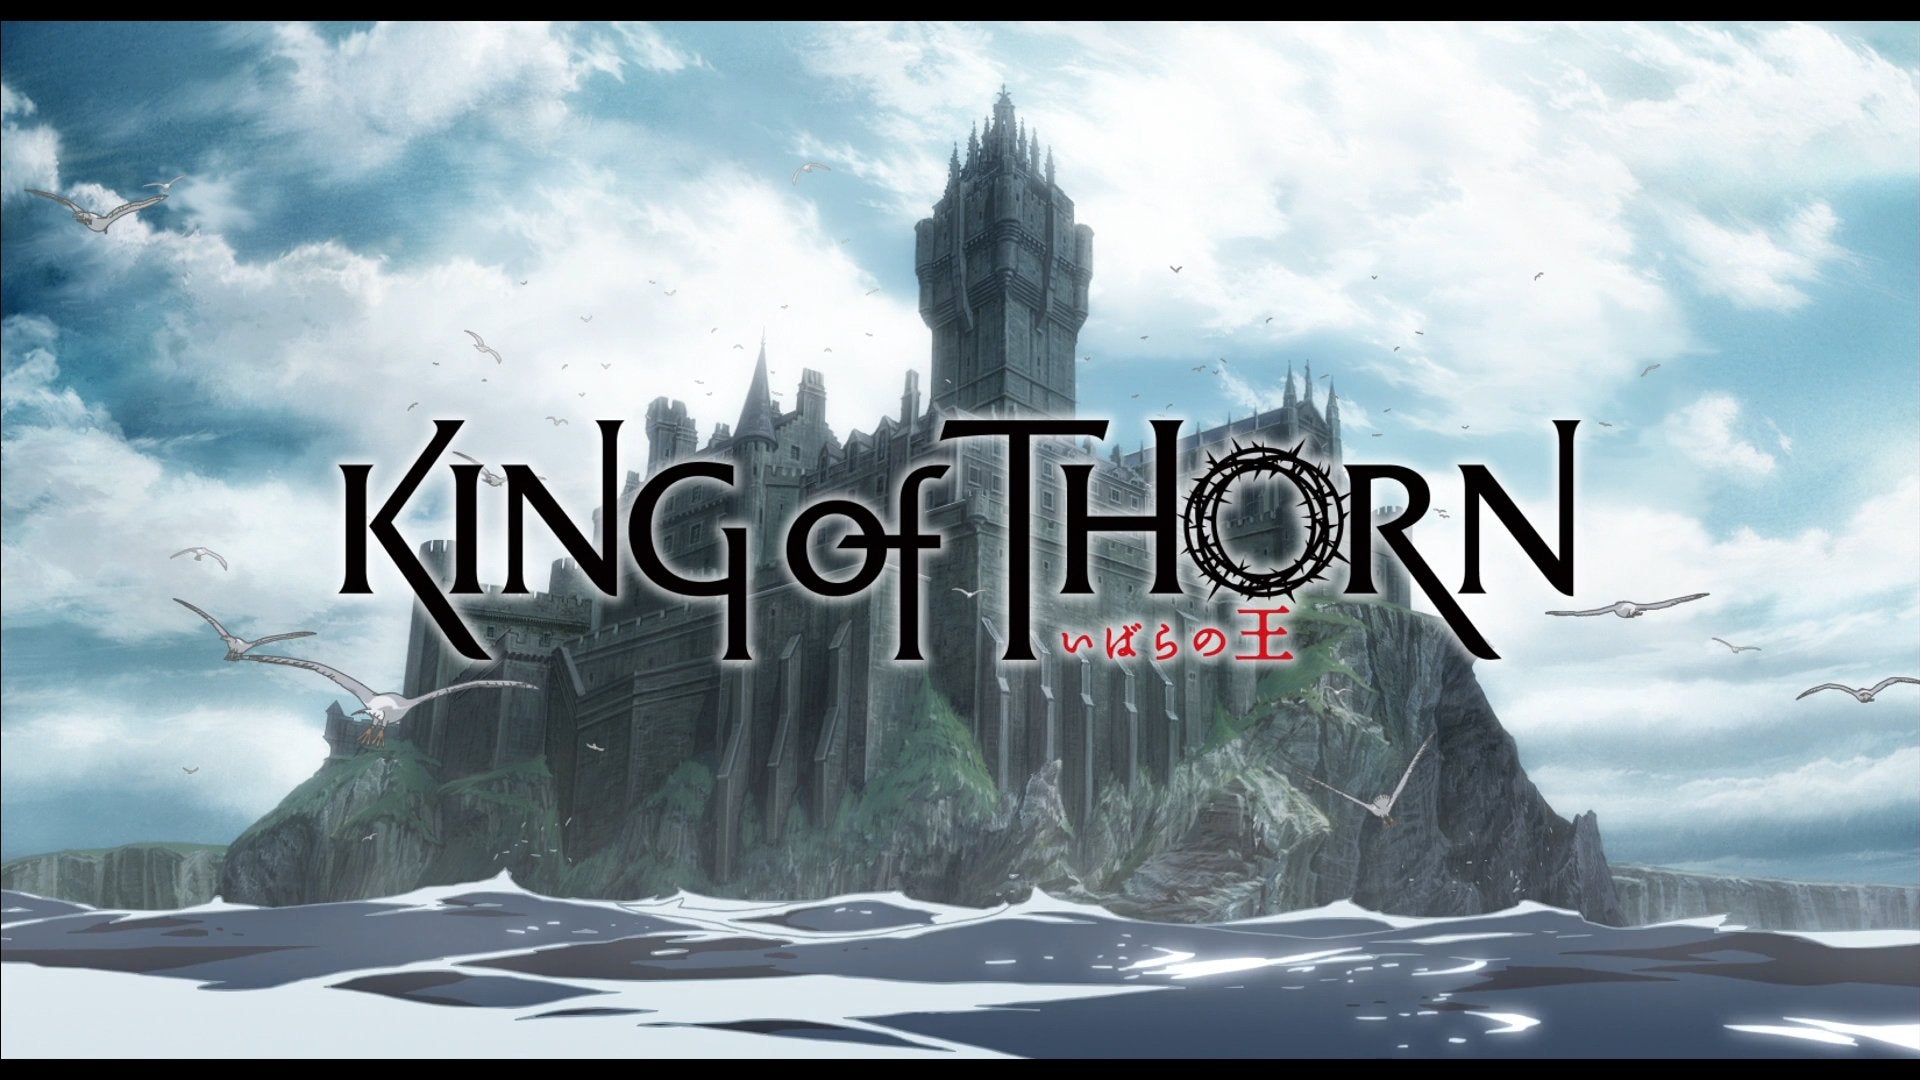 King of Thorn anime: A failed attempt at another Post-apocalyptic